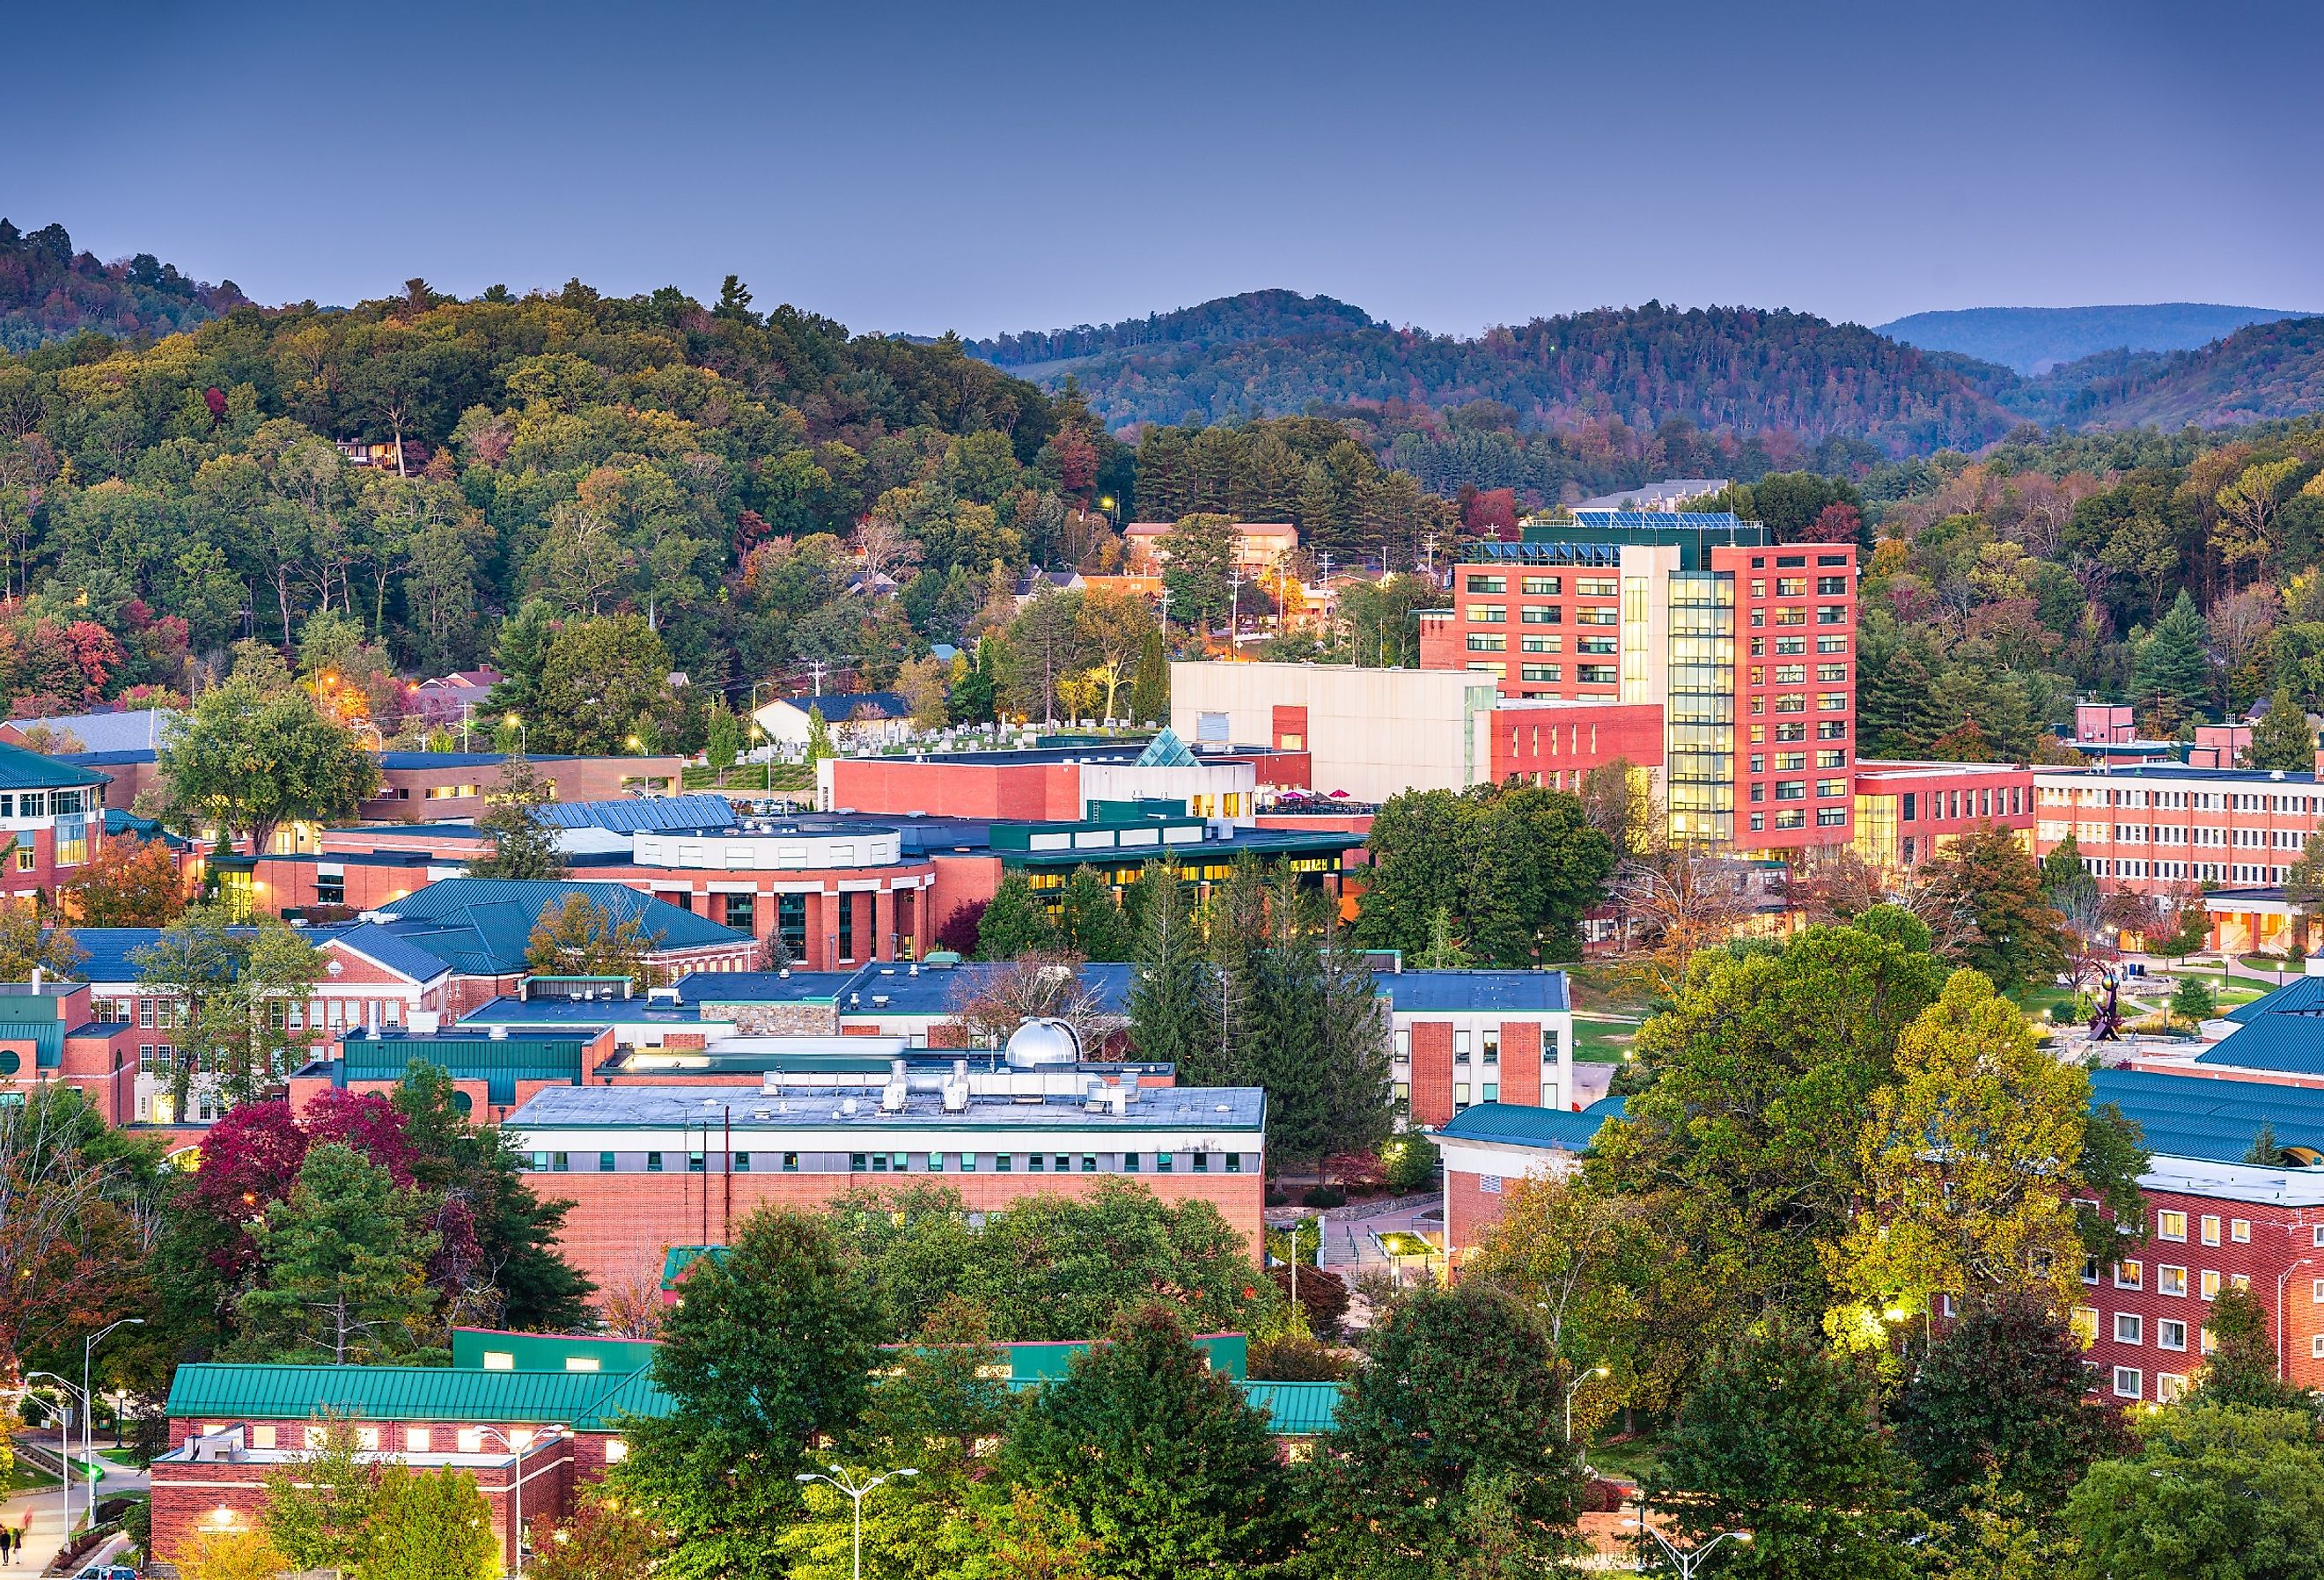 Boone, North Carolina, campus and town skyline at twilight.